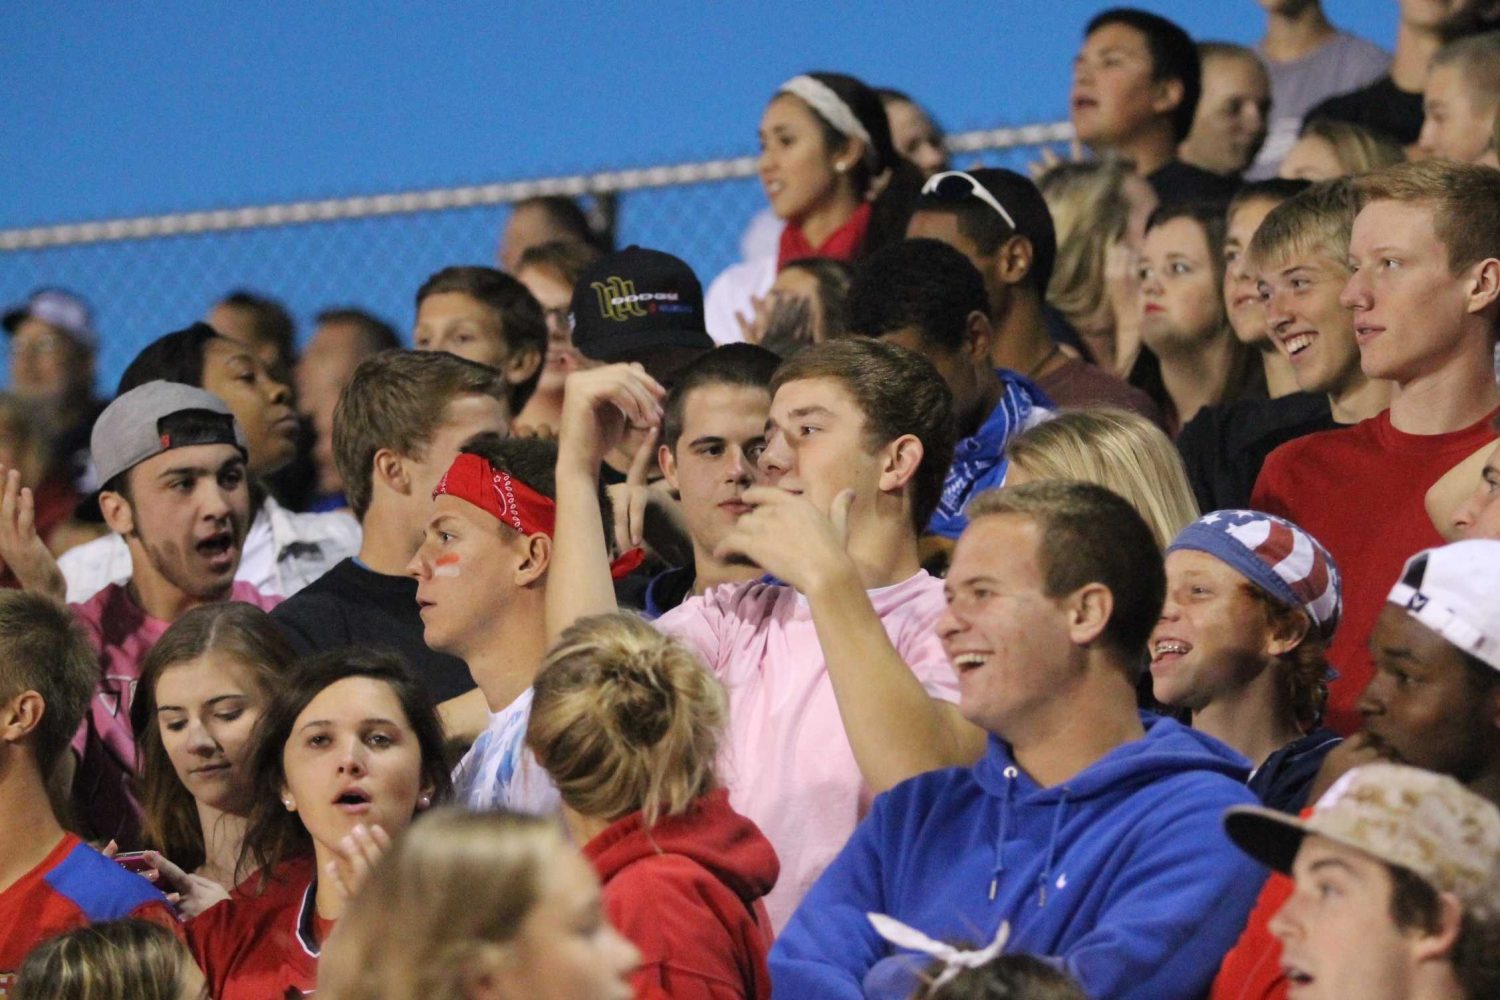 Fans cheer in the stands at the American themed varsity Football game (megan tanksley)